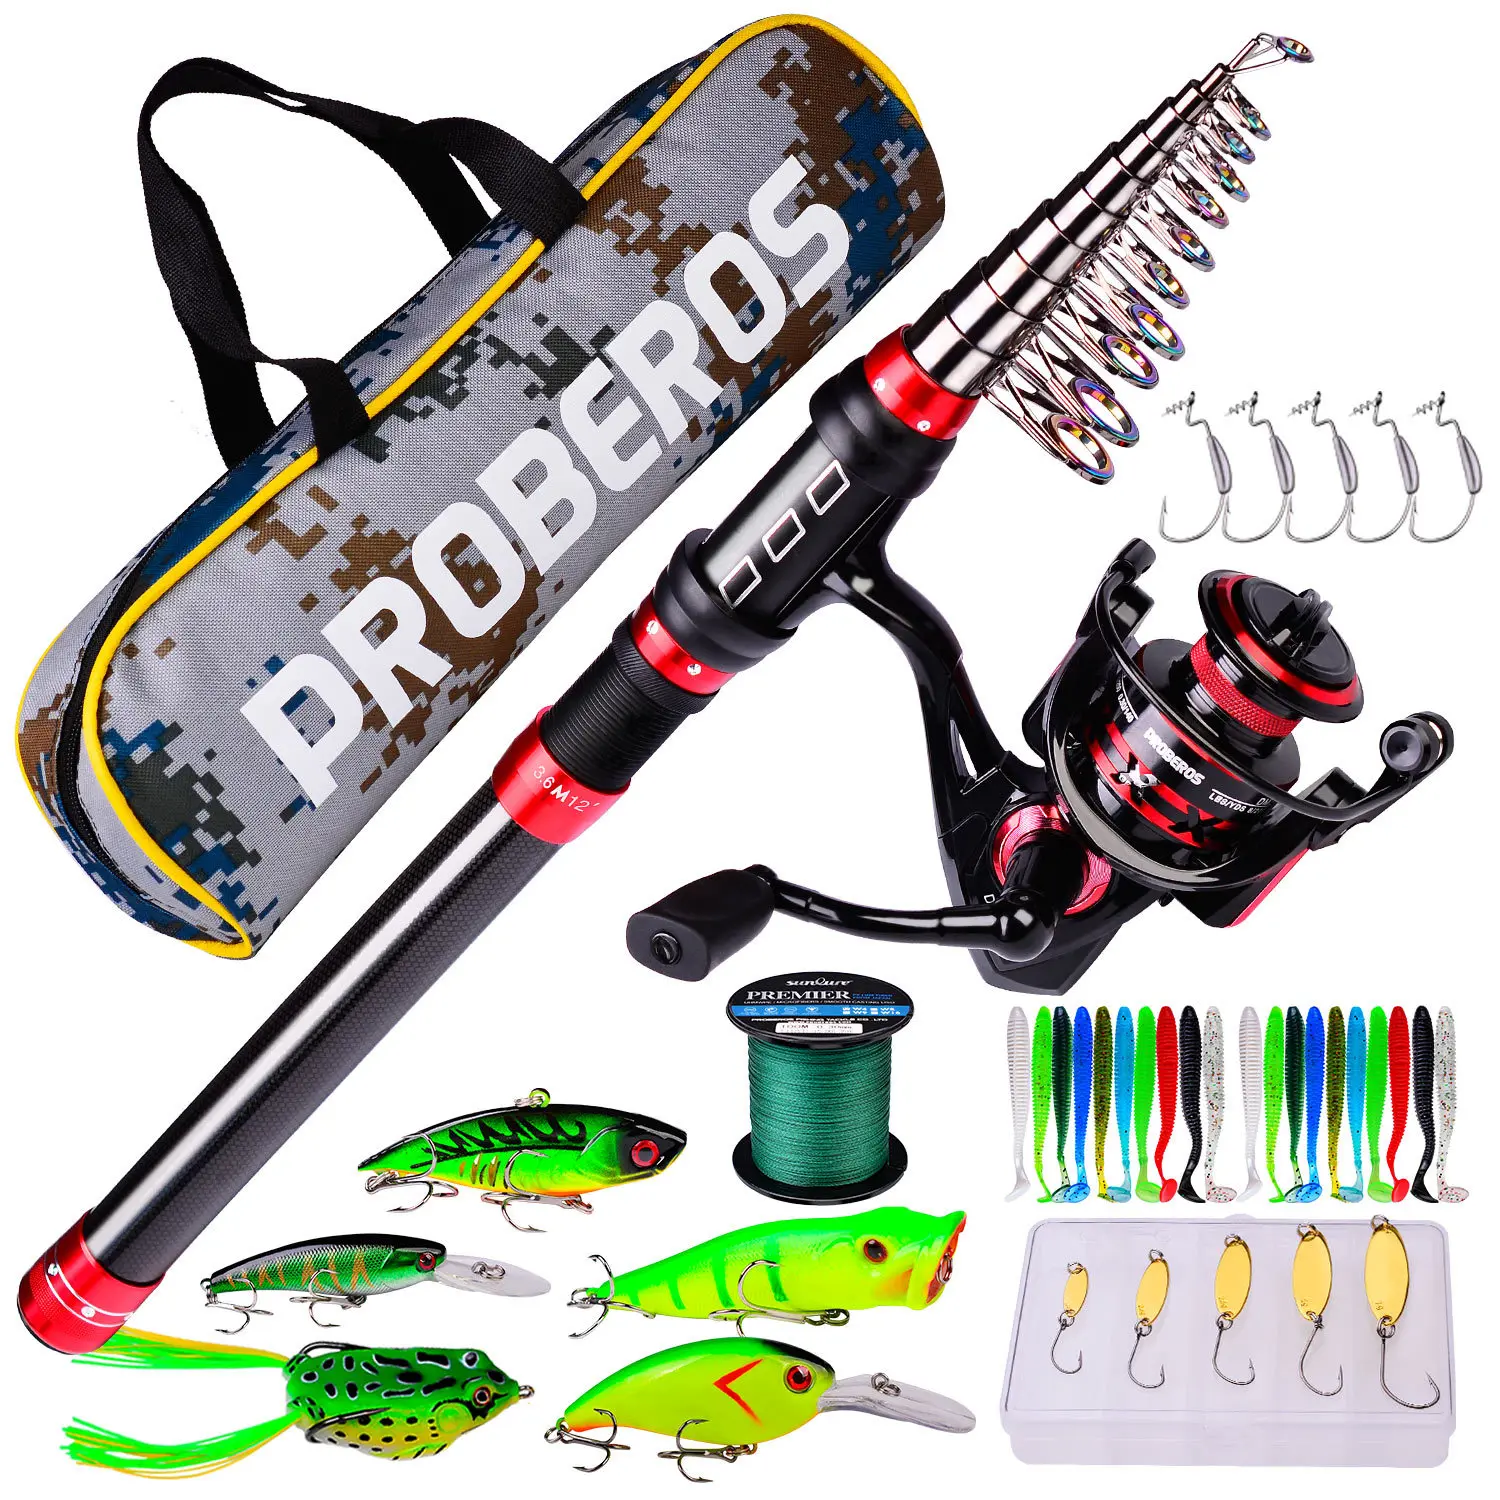 1.8-3.6m Portable CarbonFishing Rod and Speed Ratio 5.2:1 Spinning Fishing Reel and Line Bag Fishing Accessories Set Full Kit